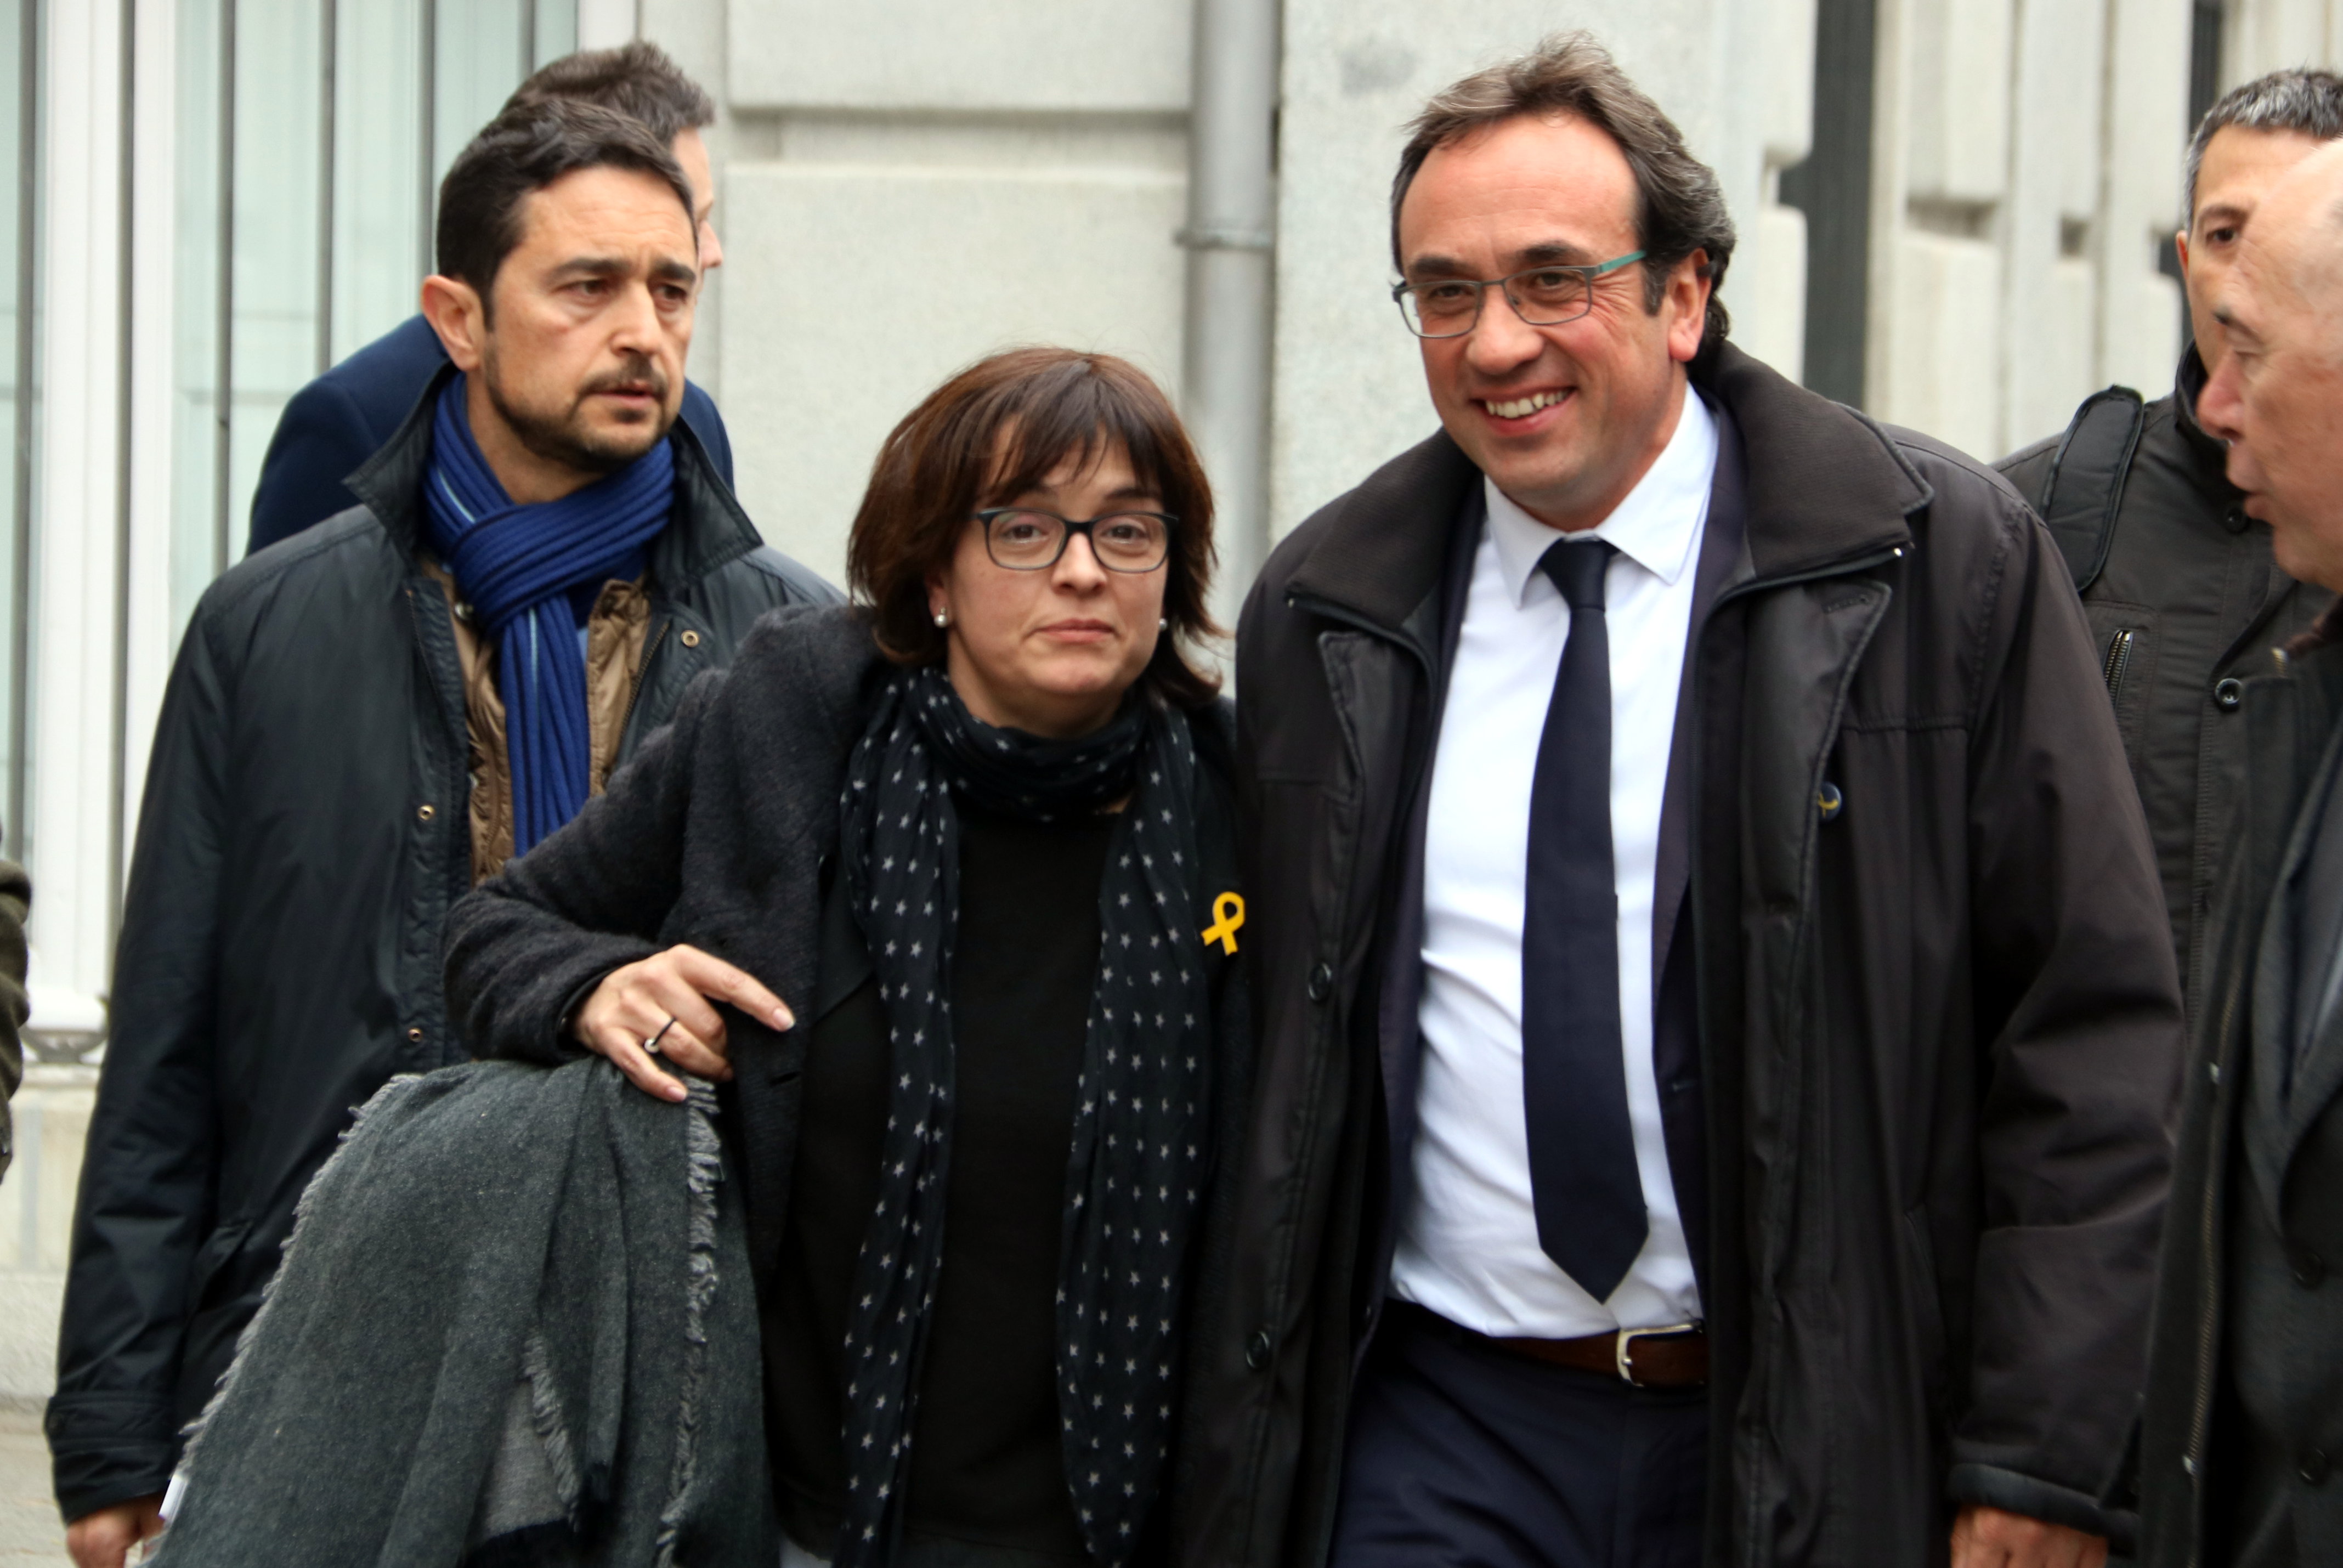 Josep Rull and his wife returning to the Supreme Court on March 23 2018 (by Pol Solà)